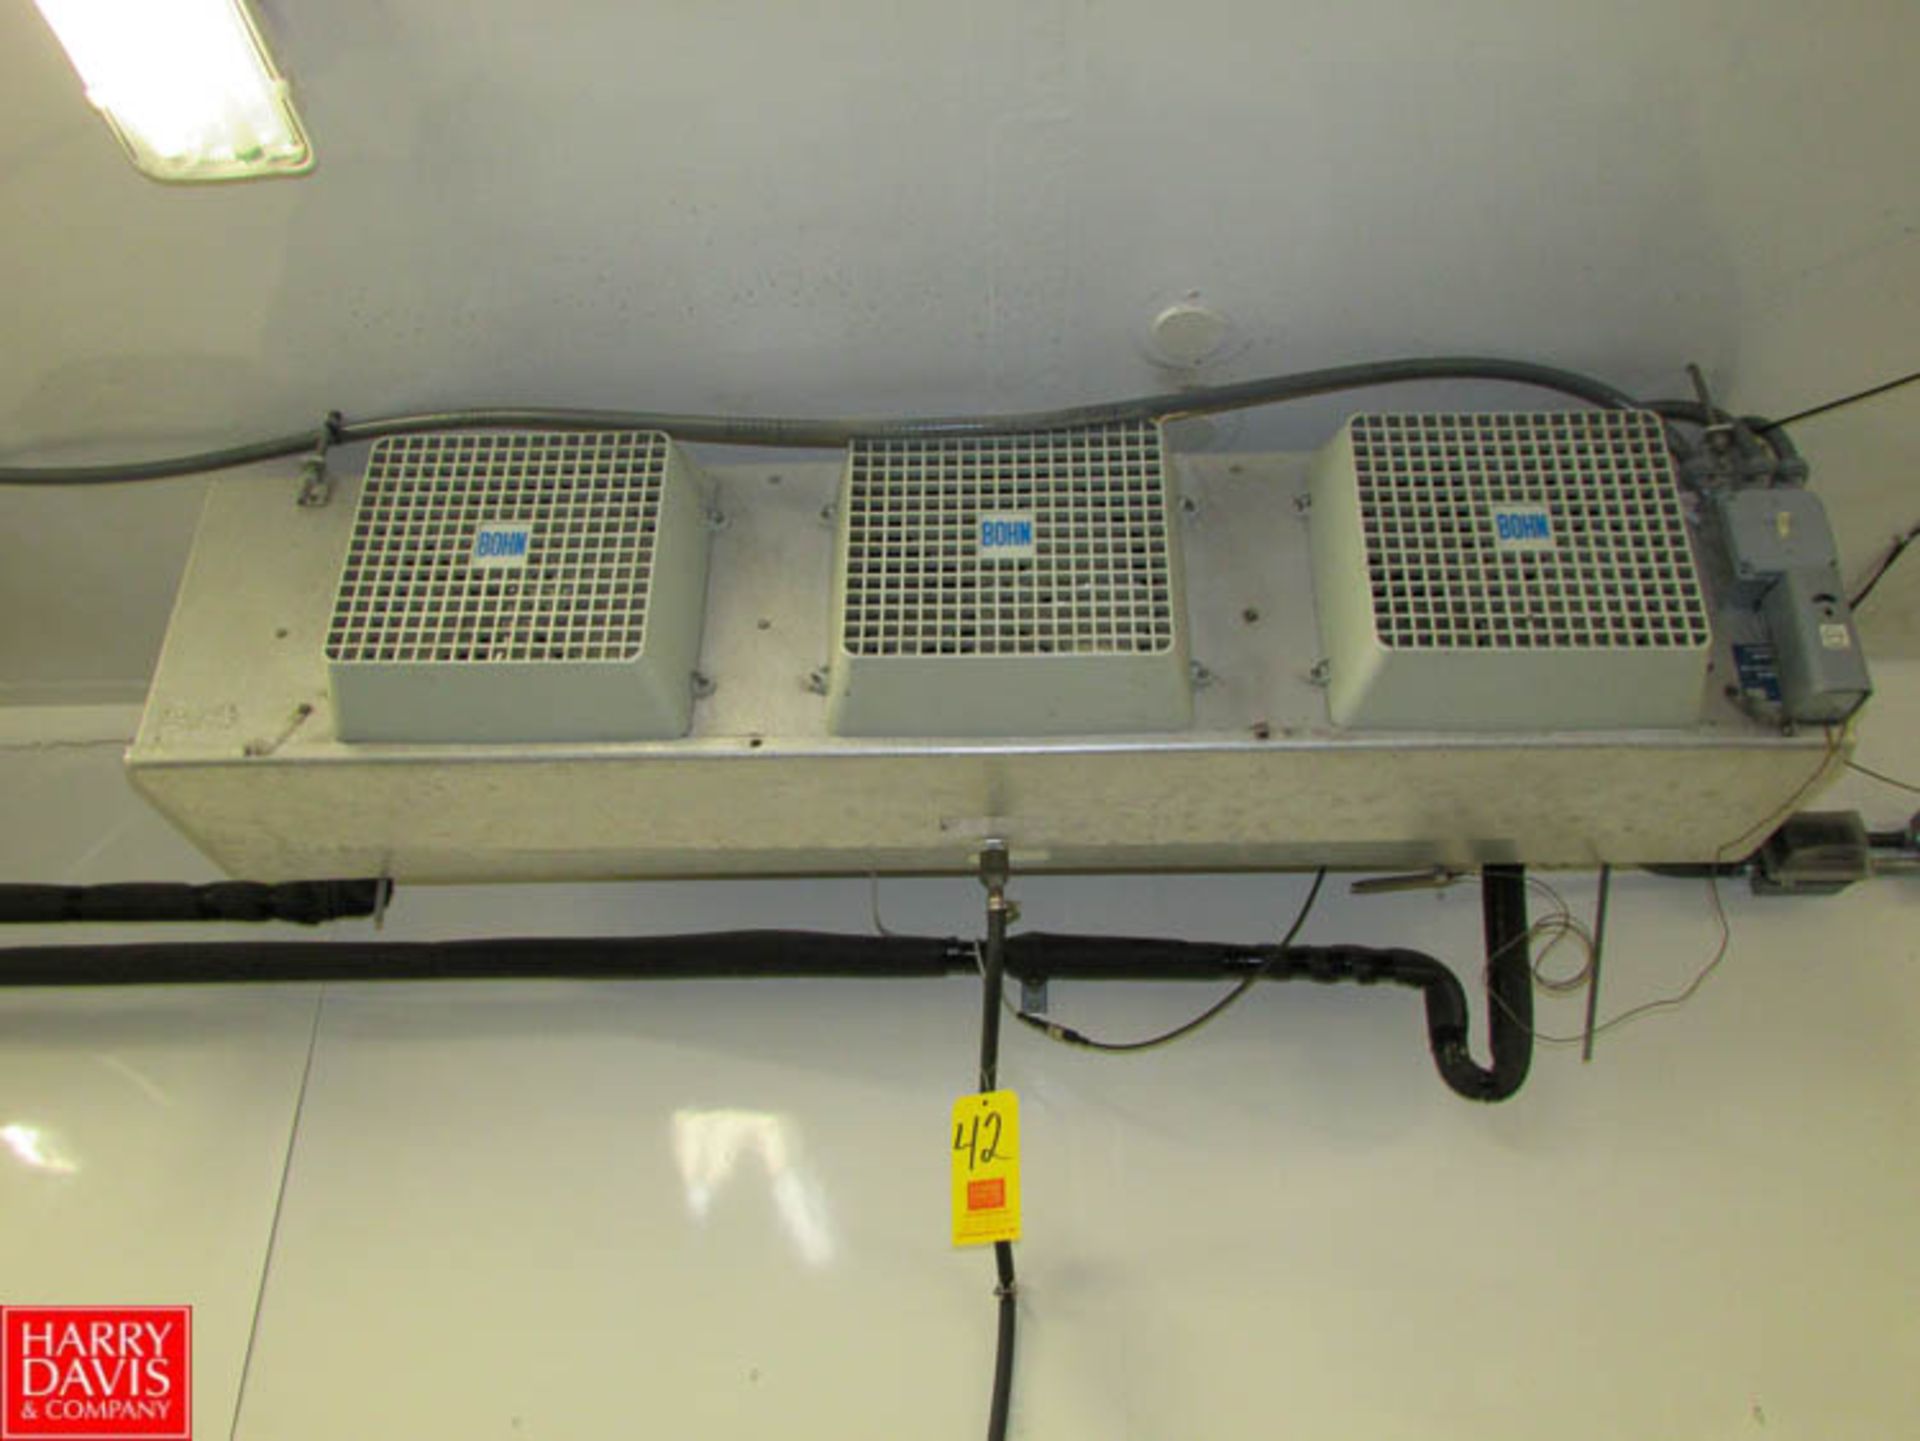 Bohn 3-Fan Freon Blowers with Heatcraft Condensing Unit, Model JH0401D7B and Tecumseh Condensing - Image 2 of 4